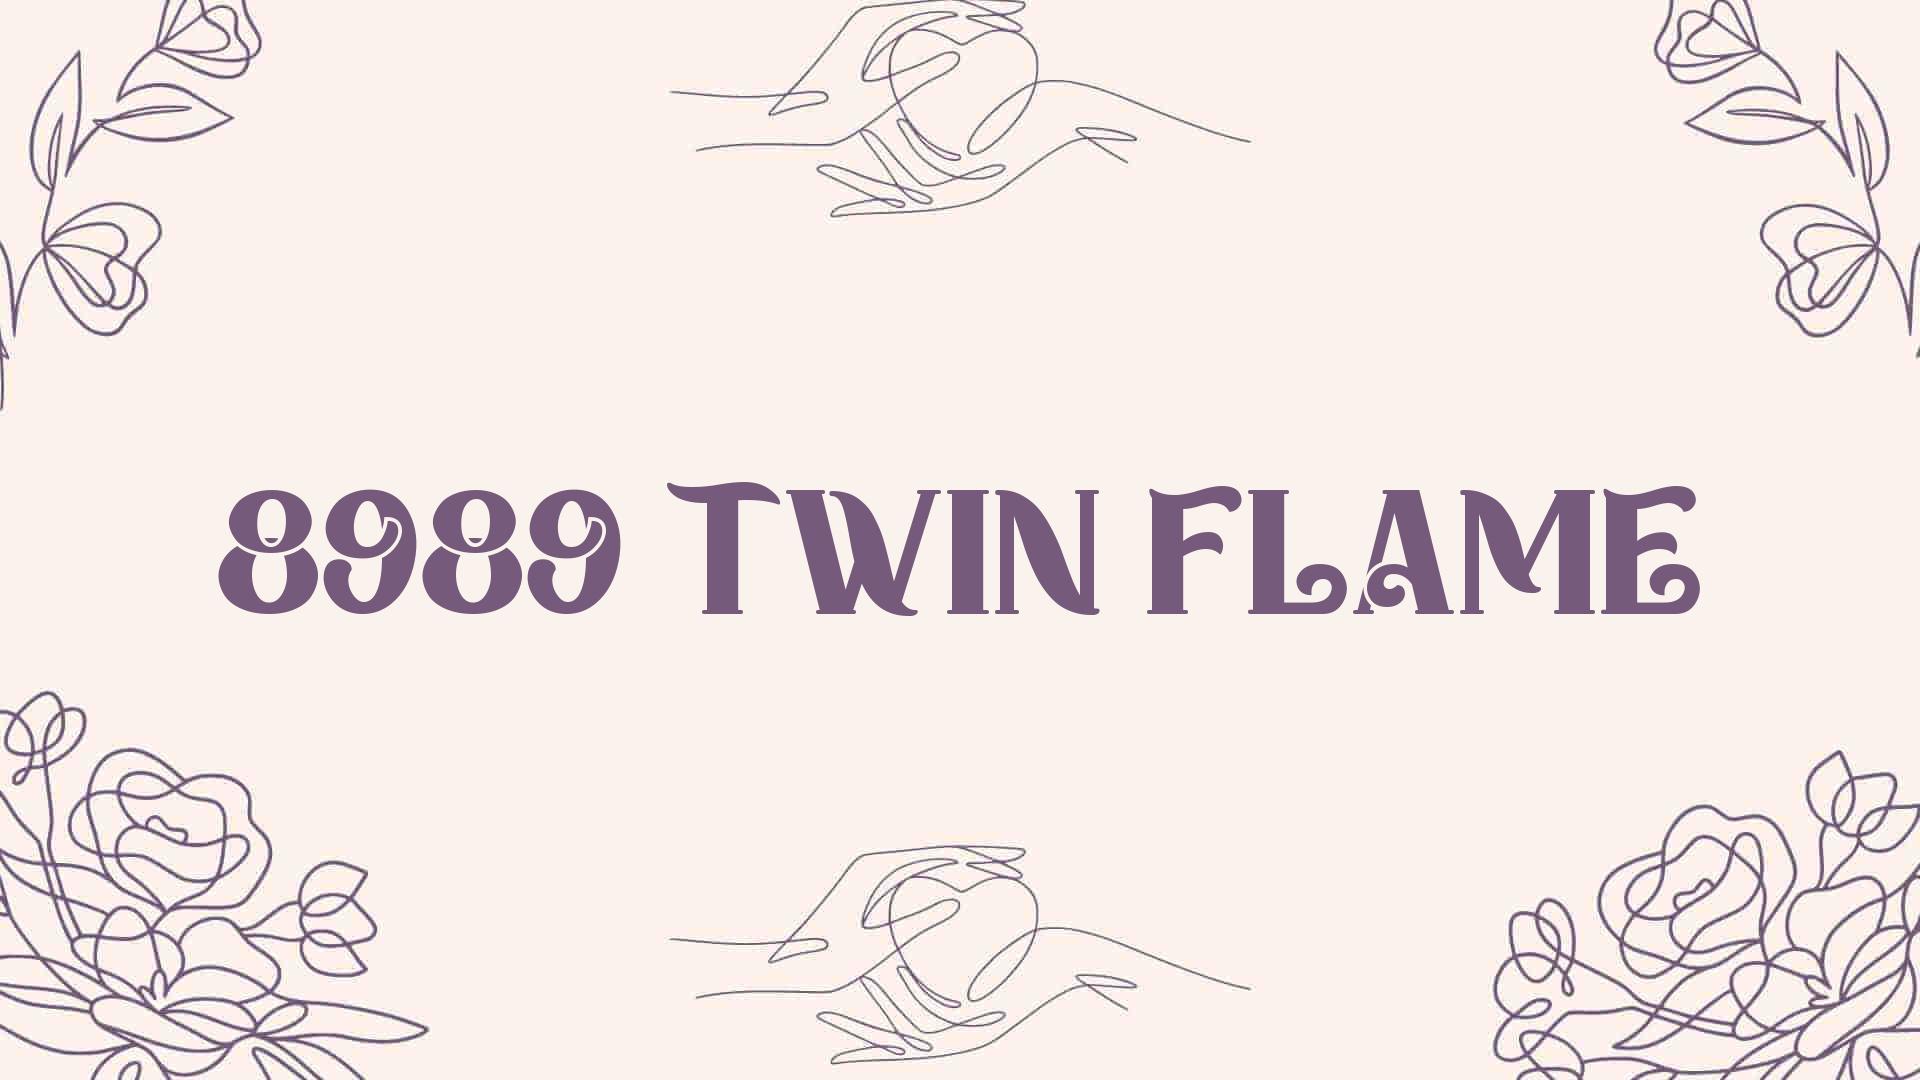 8989 twin flame [ Meaning Revealed ]